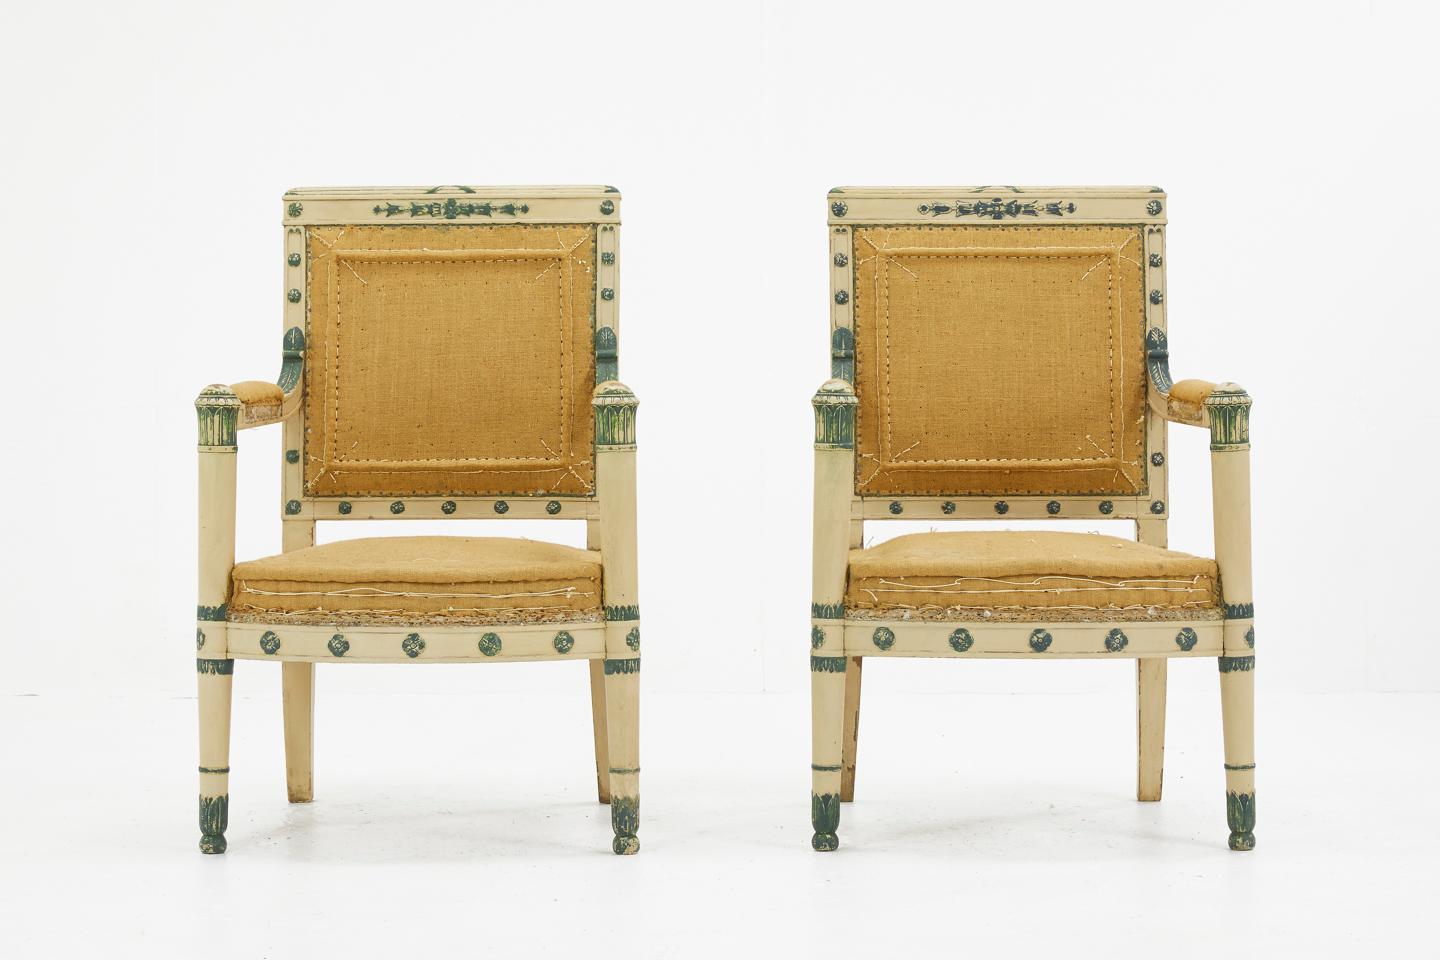 Pair of early 19th Century French painted chairs with carved decoration. Circa 1810.

Sofa also available. Item No. 1433

They have been upholstered using high quality natural burlap fabric.
Can be left and used as they are but they are also